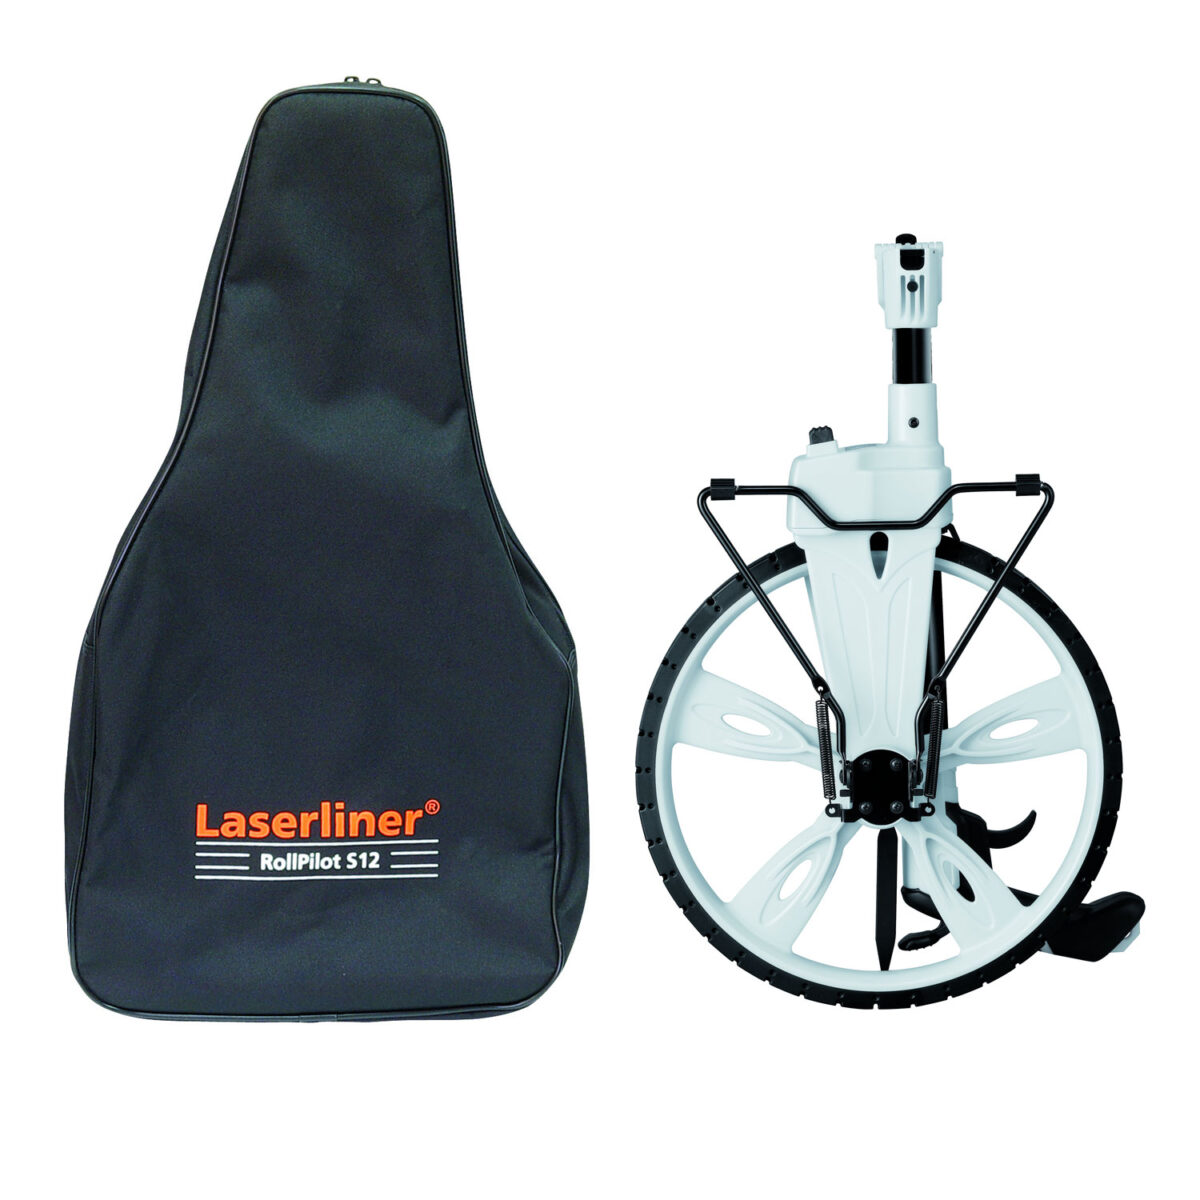 Laserliner RollPilot S12 and Carry Bag